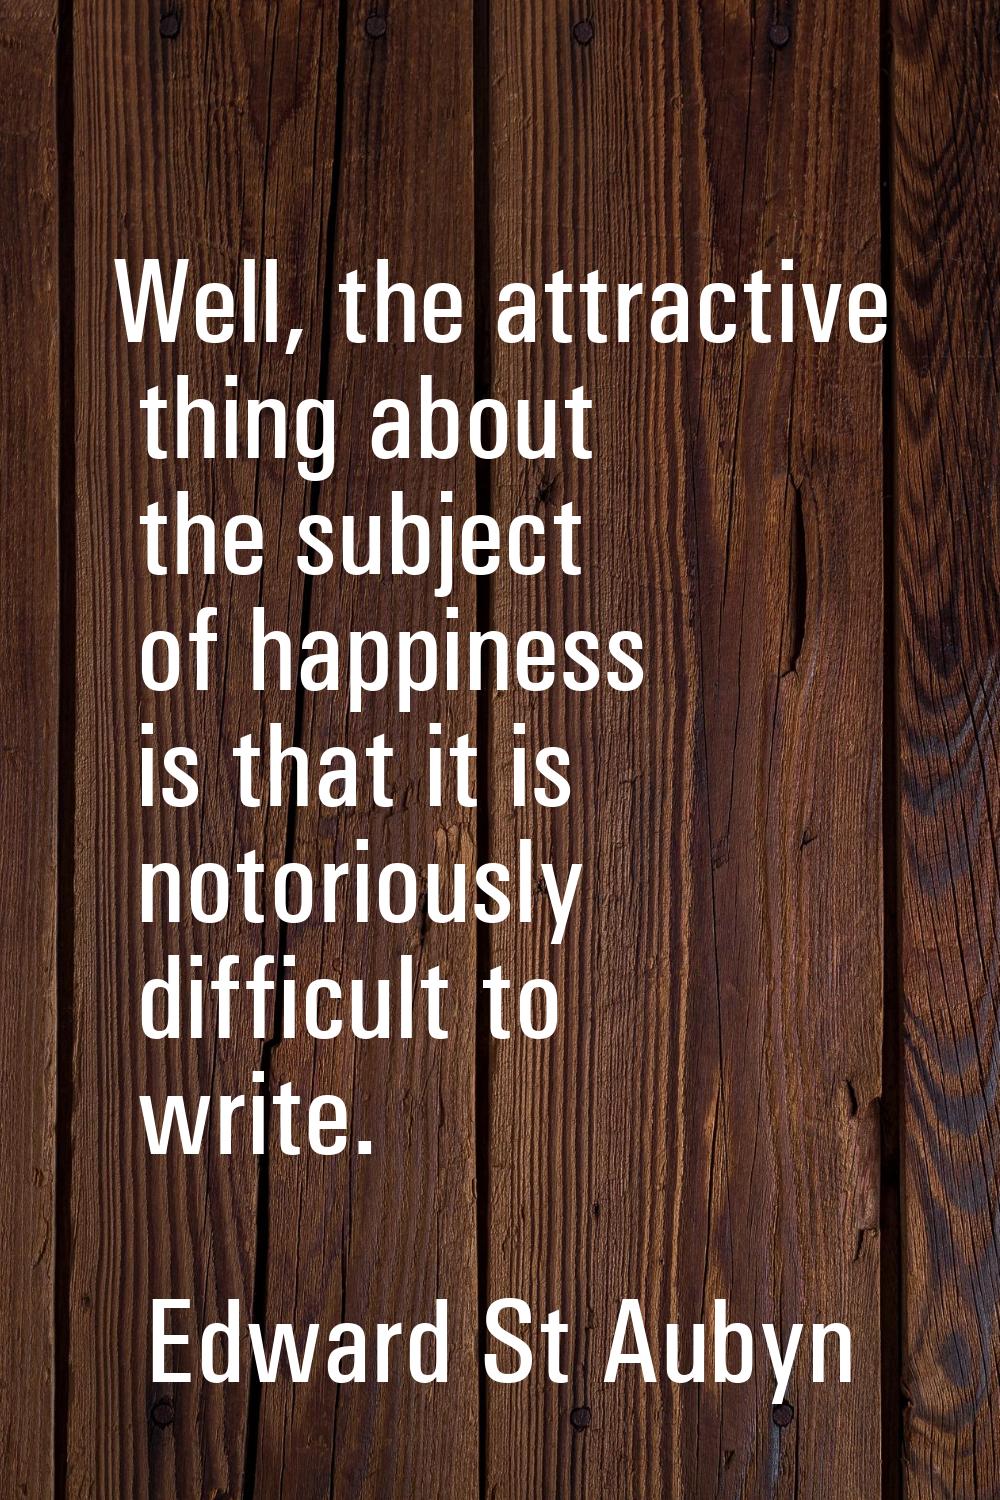 Well, the attractive thing about the subject of happiness is that it is notoriously difficult to wr